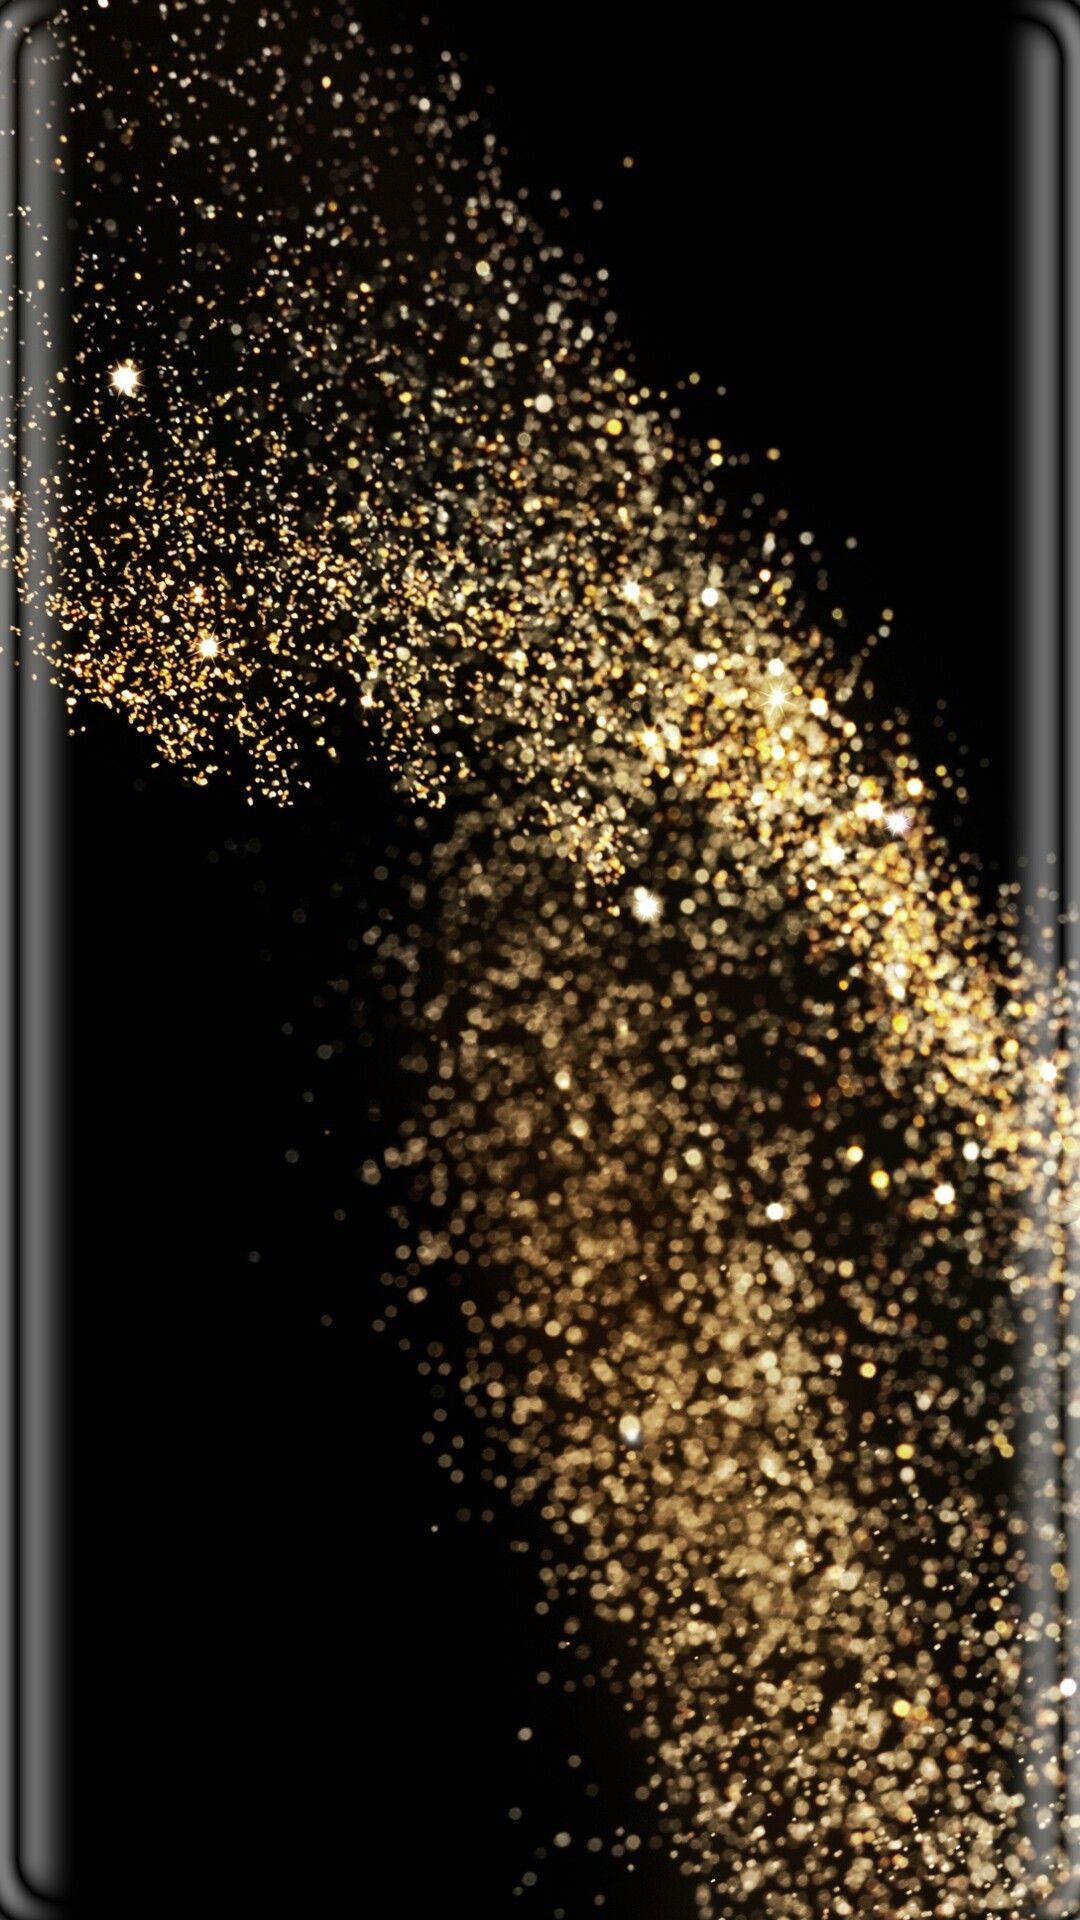 Black and Gold iPhone Wallpaper Free Black and Gold